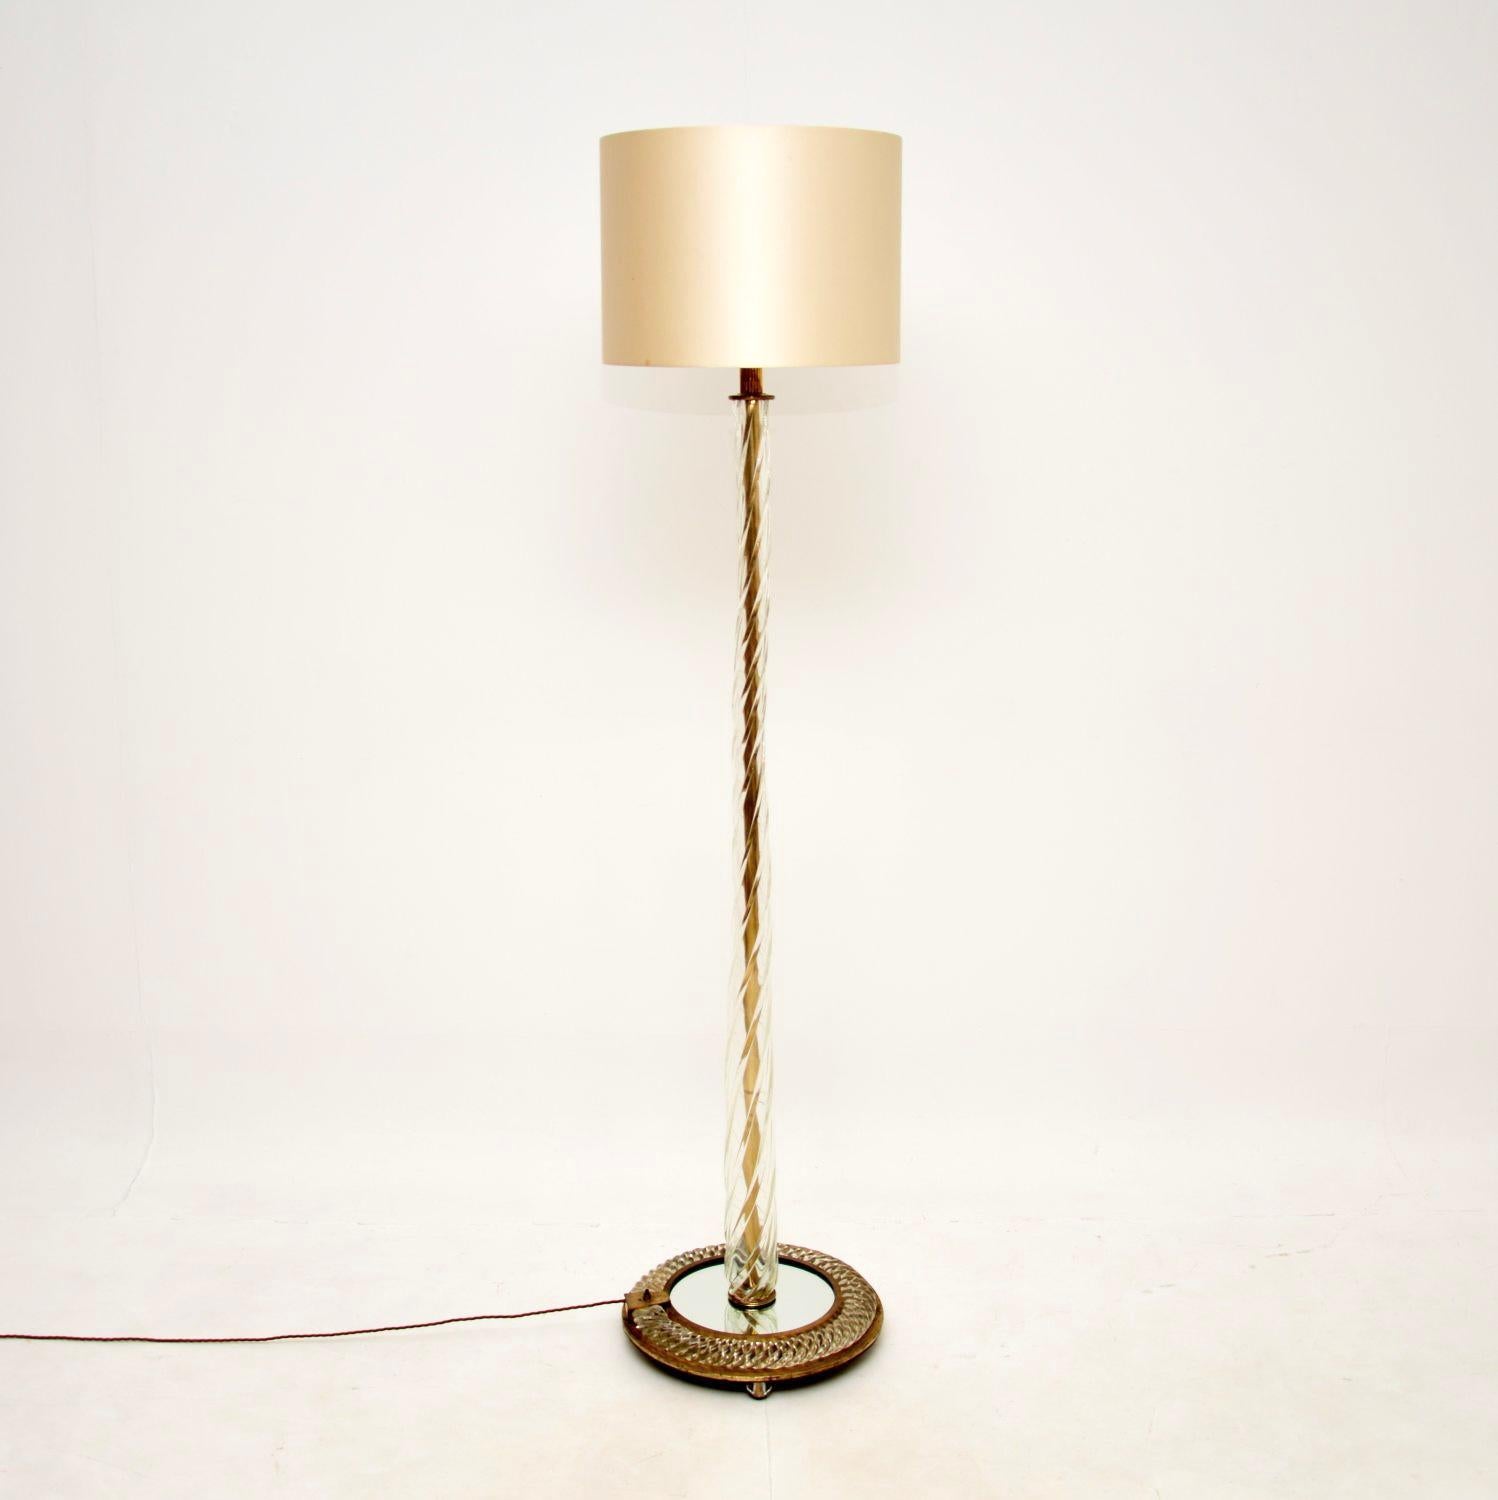 An absolutely stunning vintage Italian Murano glass floor lamp, dating from around the 1950-60’s.

This is of exceptional quality, with a gorgeous thick rope twist glass stand, wrapped around a brass column. The base is incredibly beautiful, with